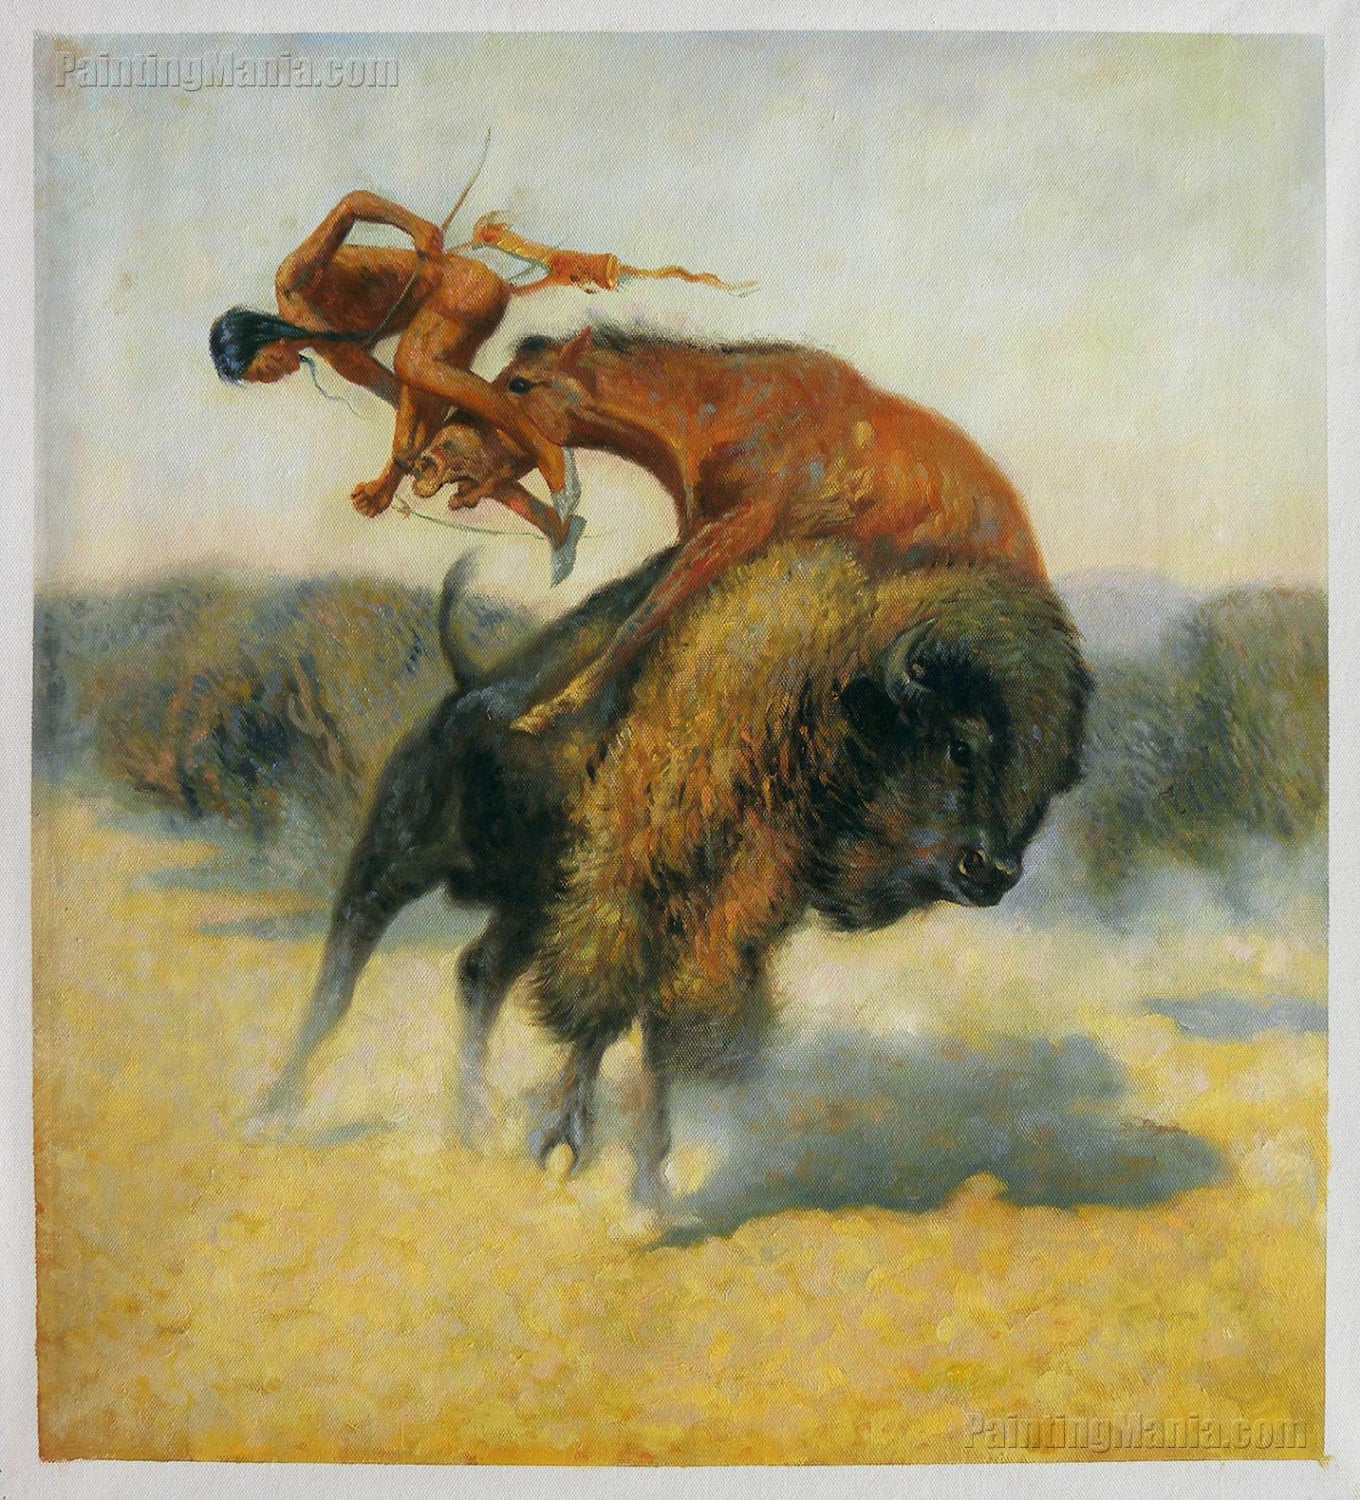 Episode of a Buffalo Hunt Frederic Remington Hand-painted pic